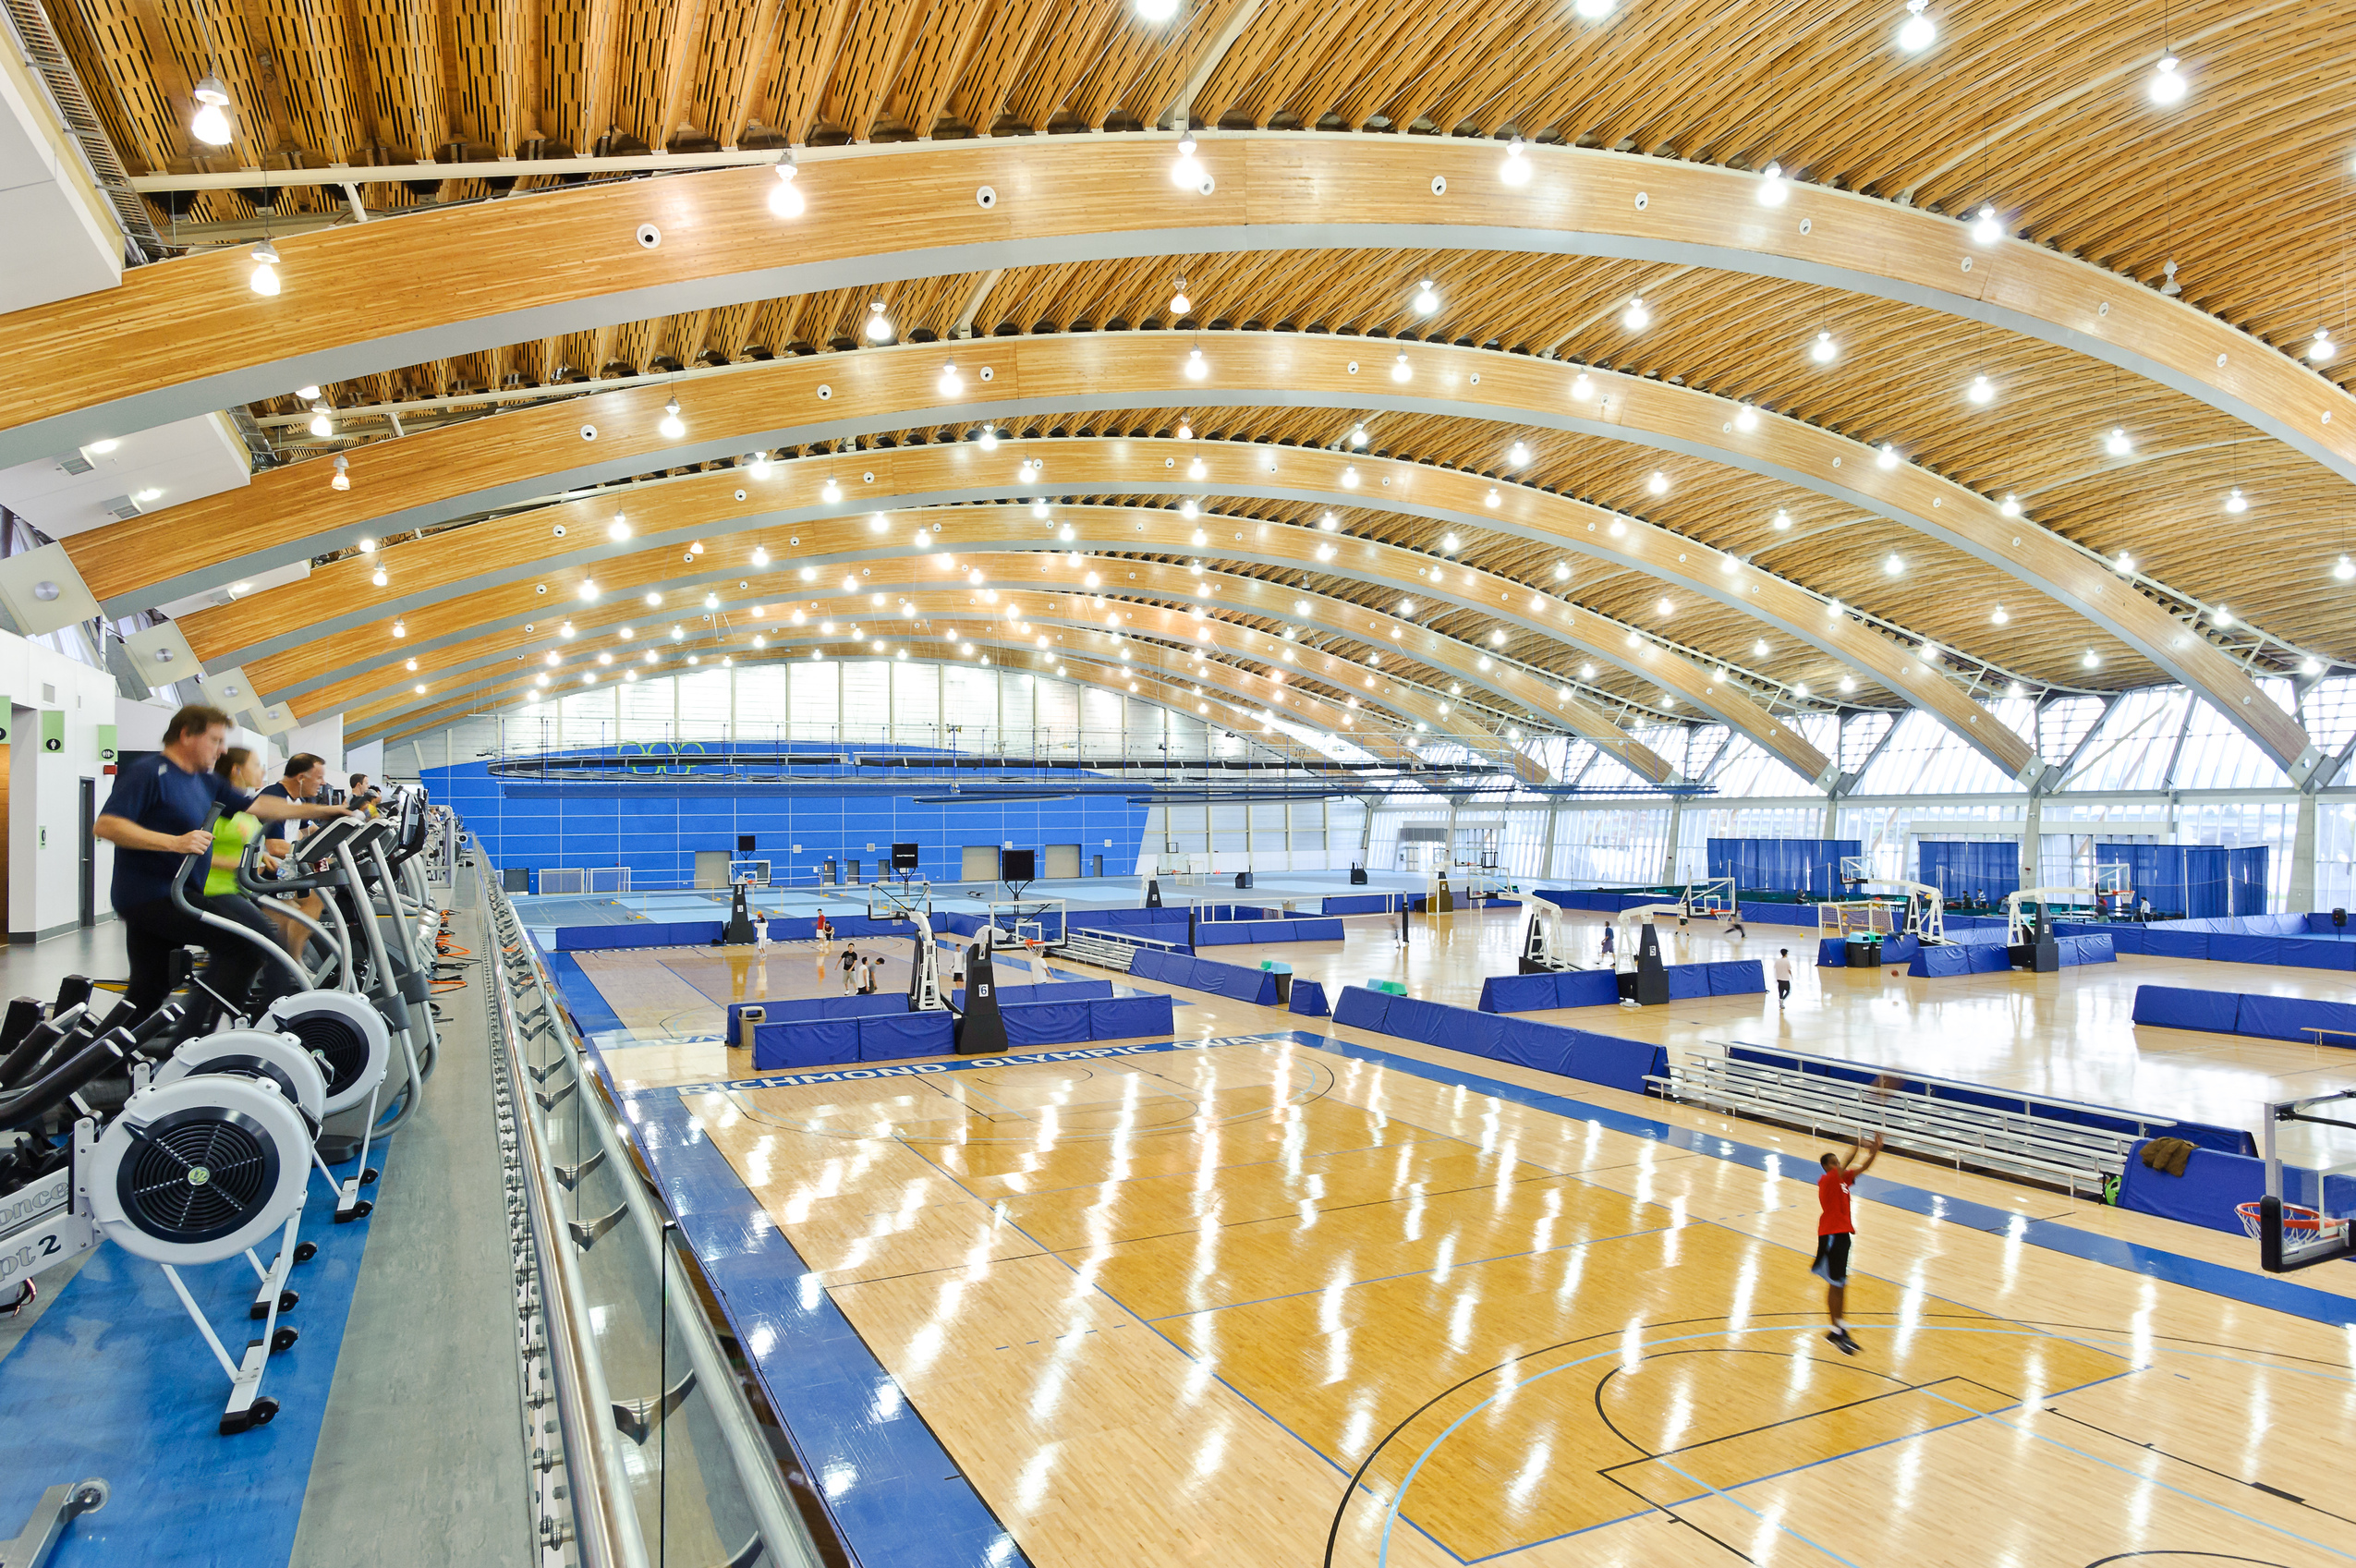 The Richmond Olympic Oval is the first Olympic Oval to live on as a valuable community recreation center and civic asset.